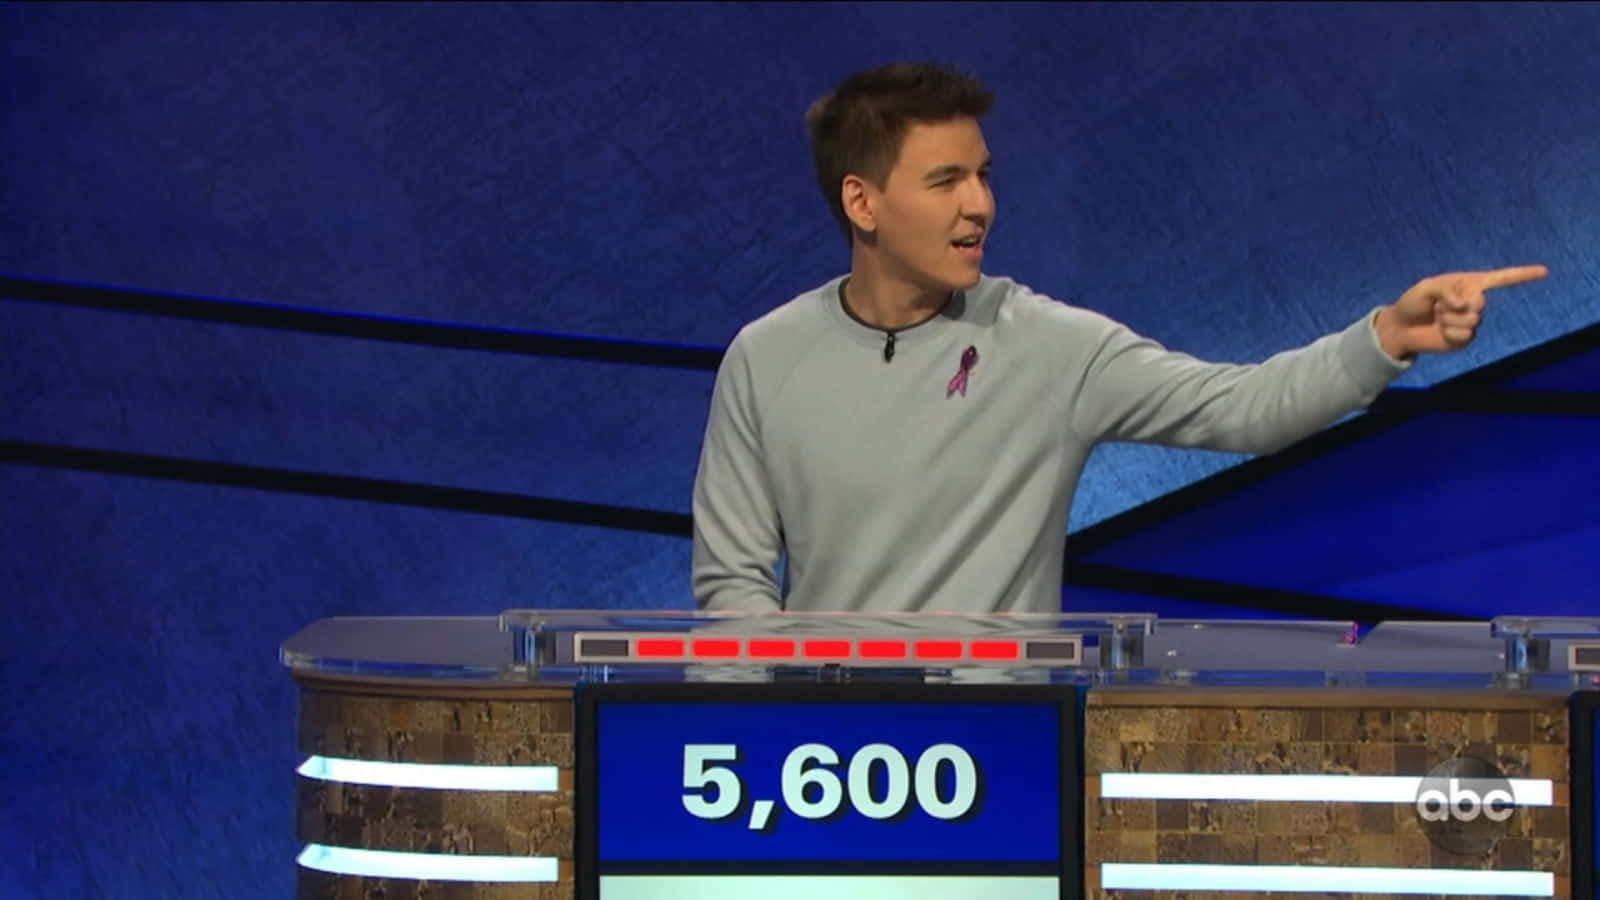 A Man Is Pointing At A Jeopardy Board